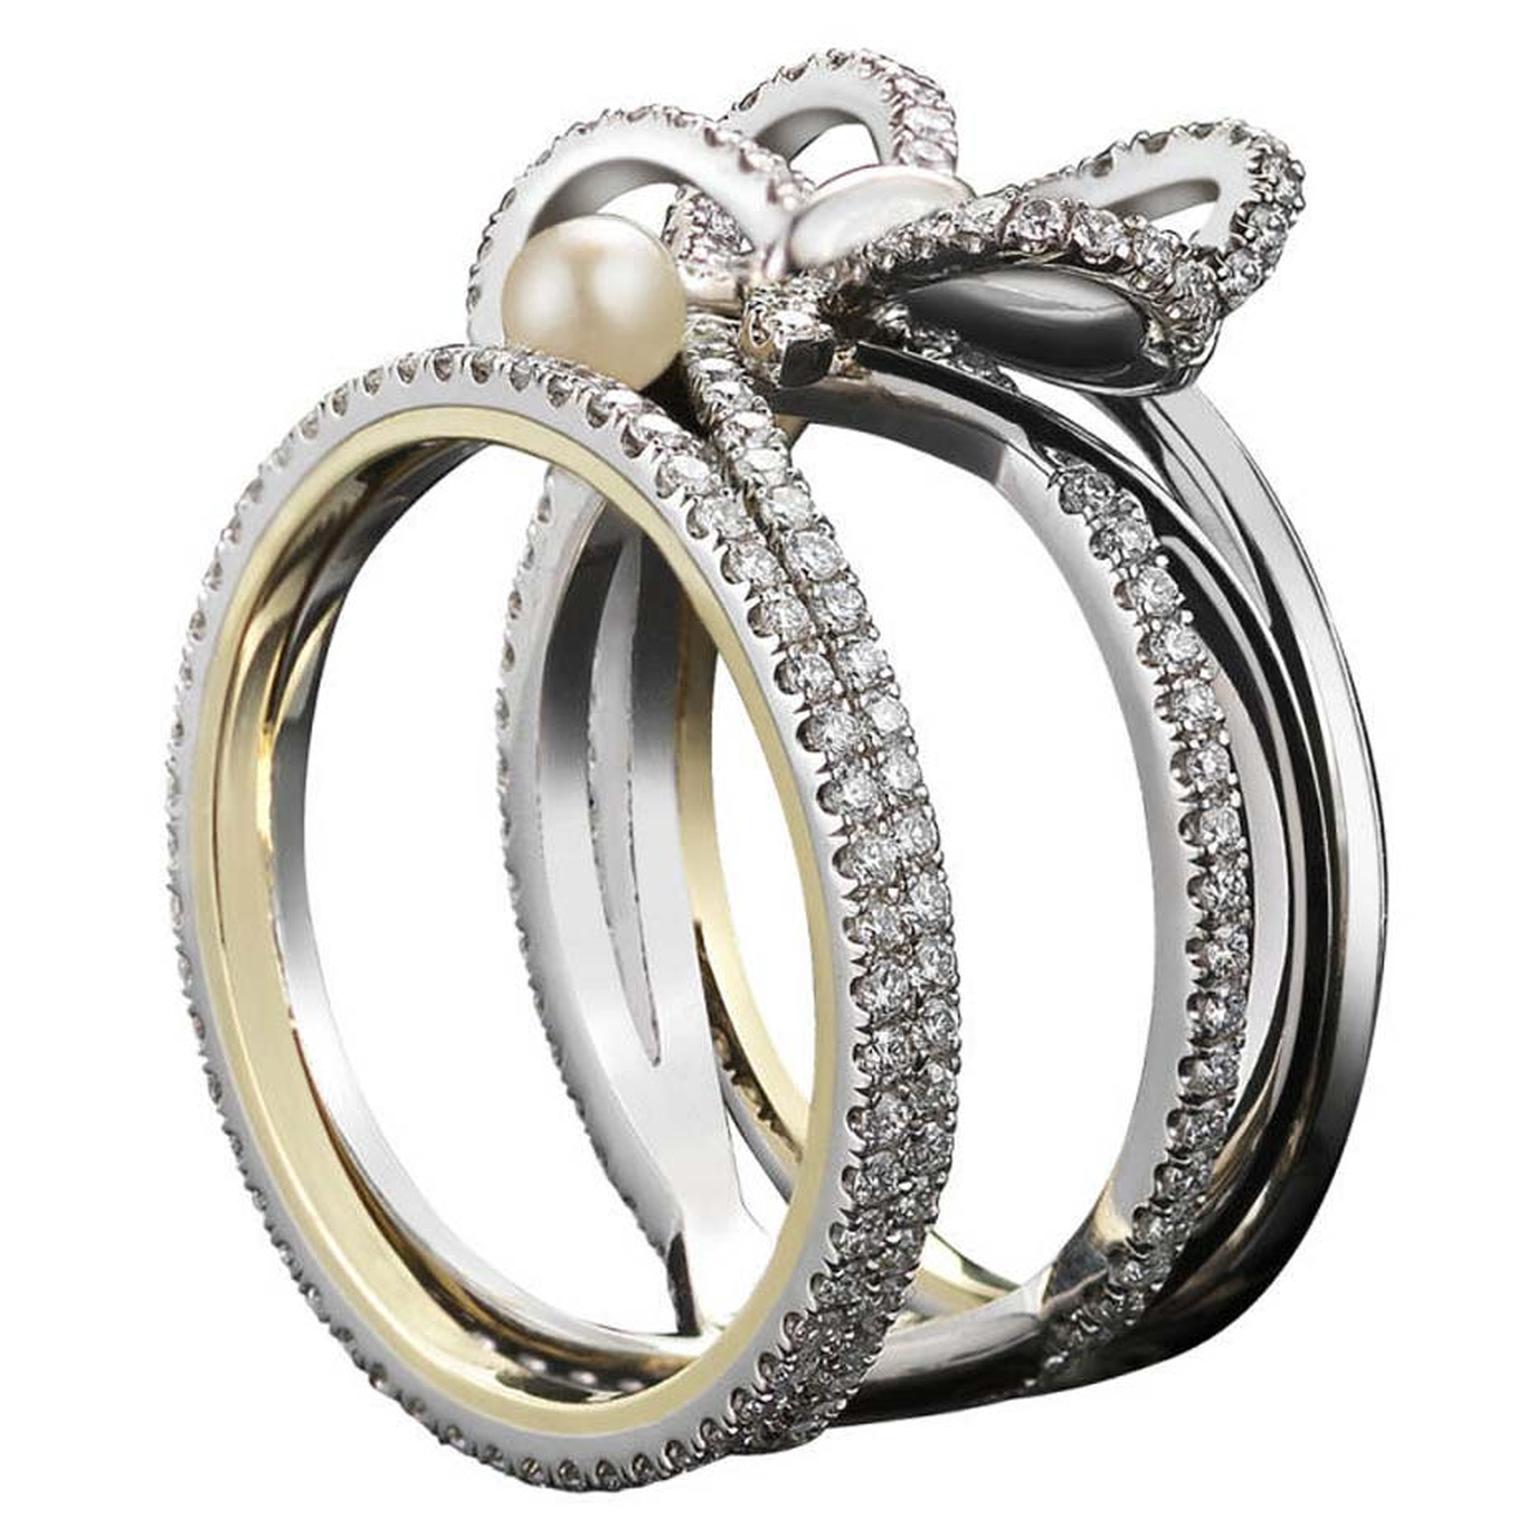 Contemporary Diamond Bow and Pearl ring by Alexandra Mor with the designer's signature 1mm knife-edged wire, set in platinum around inner bands of 18ct yellow gold.